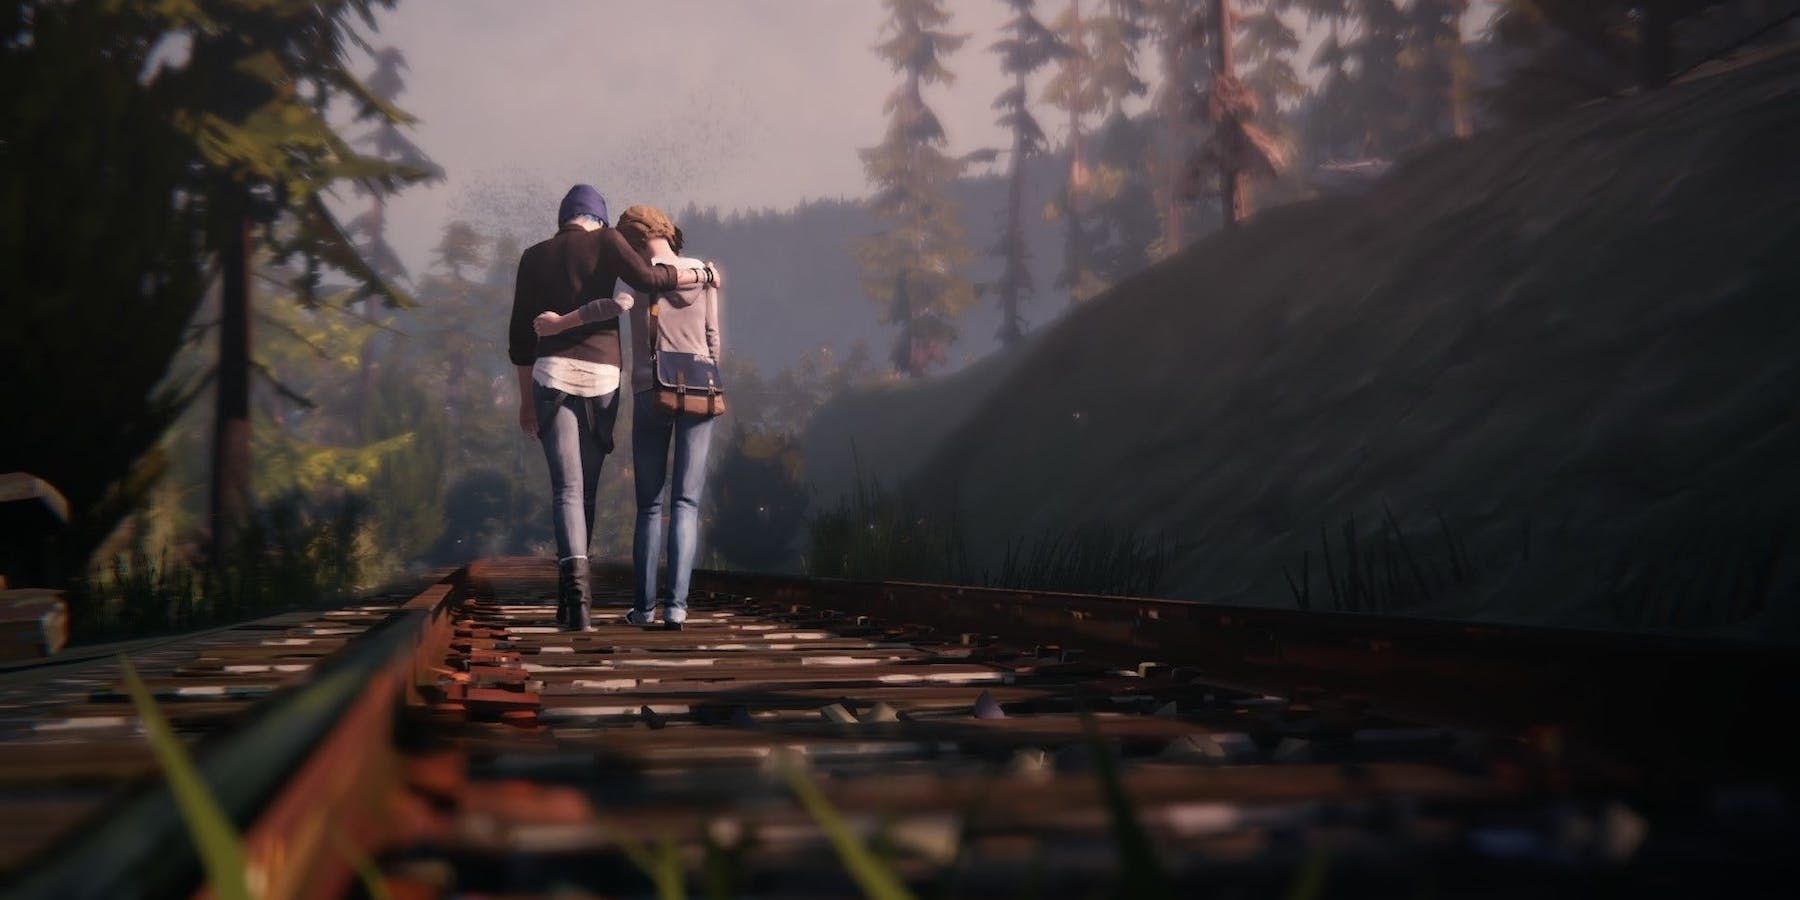 Chloe and Max walking on train tracks while embracing in Life is Strange.